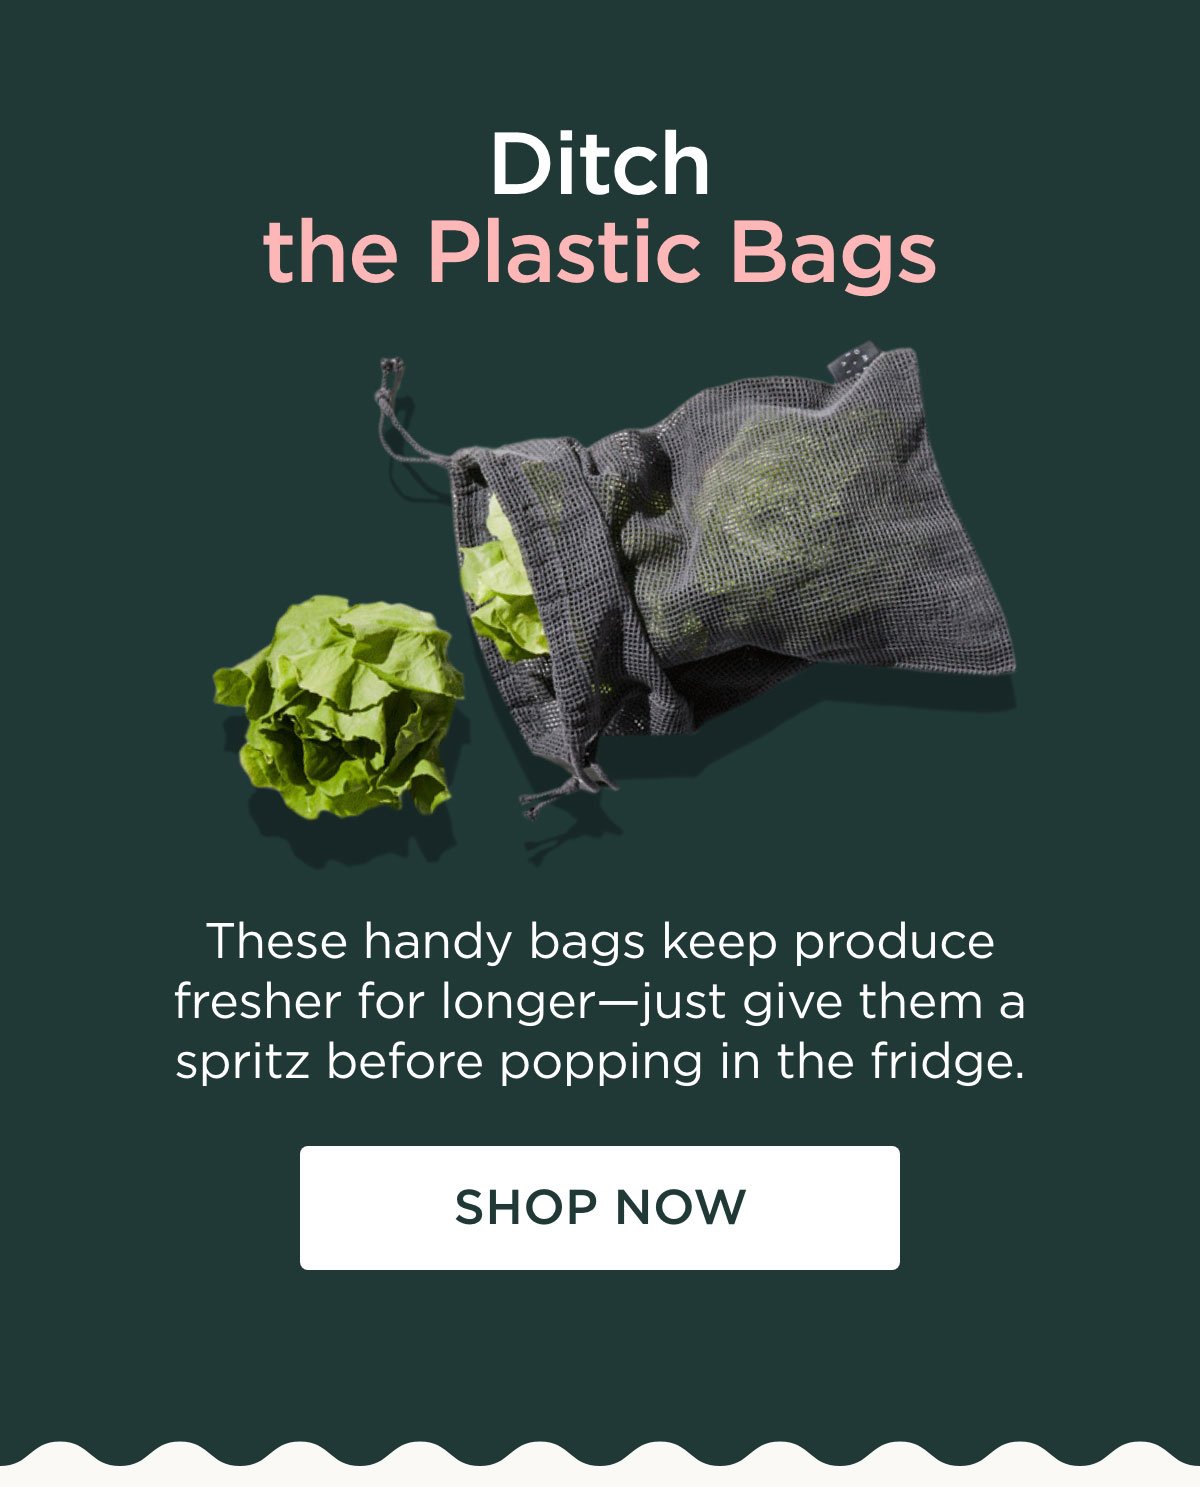 Ditch the Plastic Bags